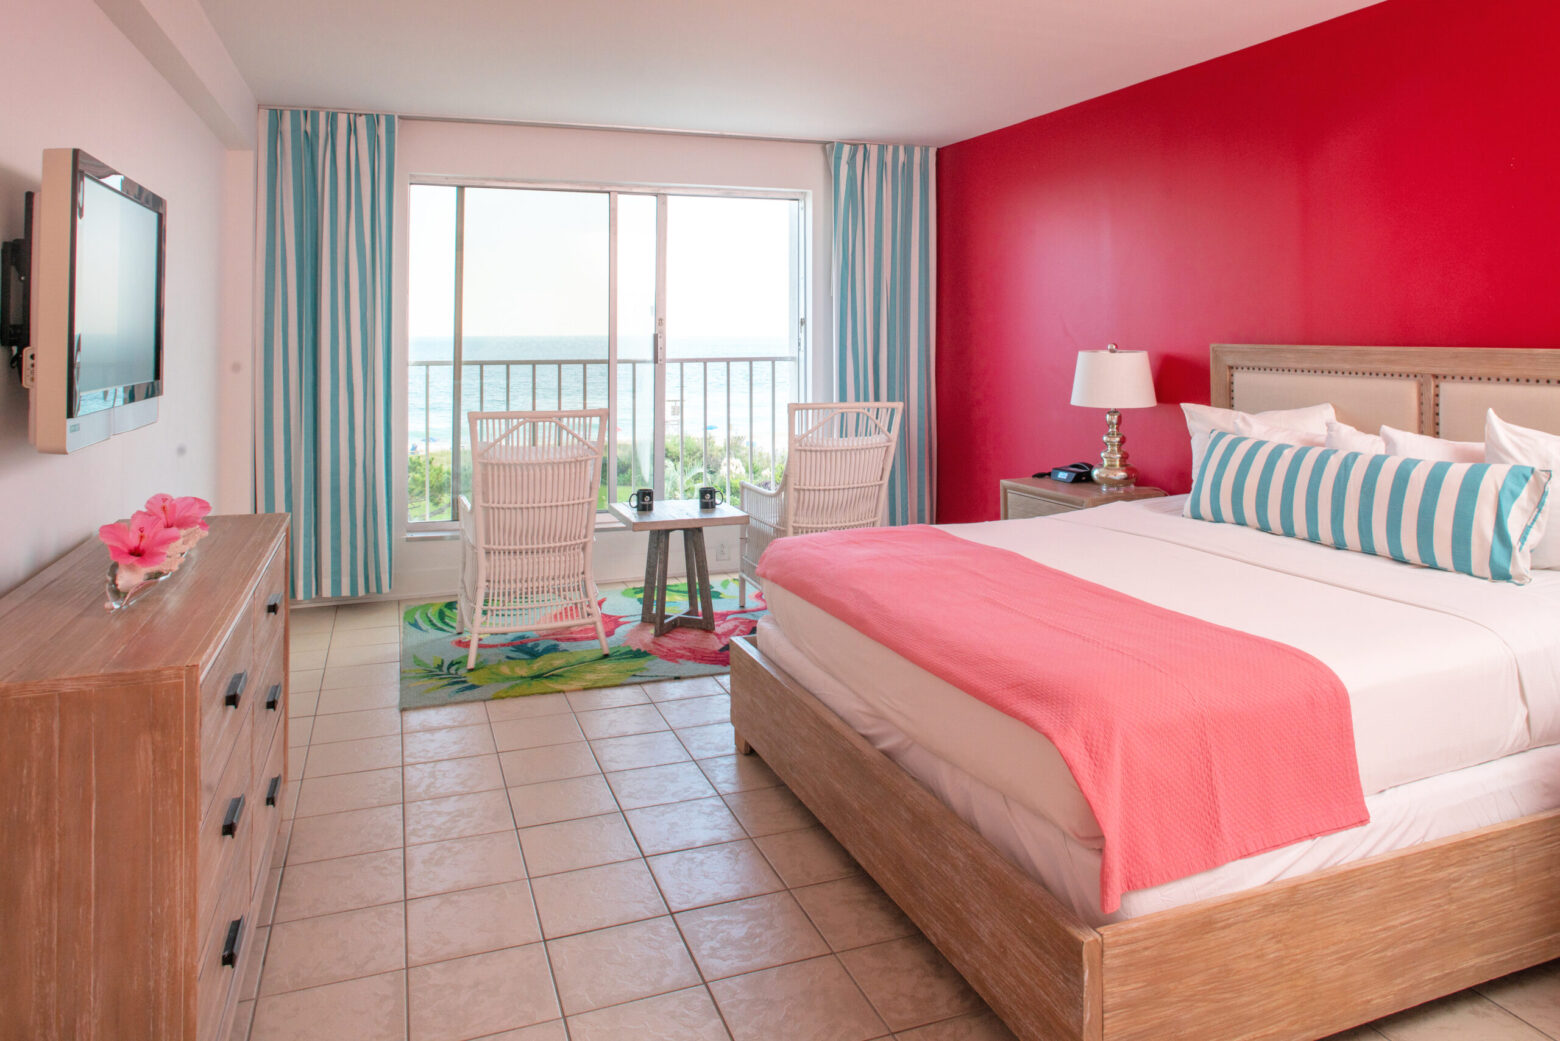 Oceanfront King Room with Pink Wall at Blockade Runner.